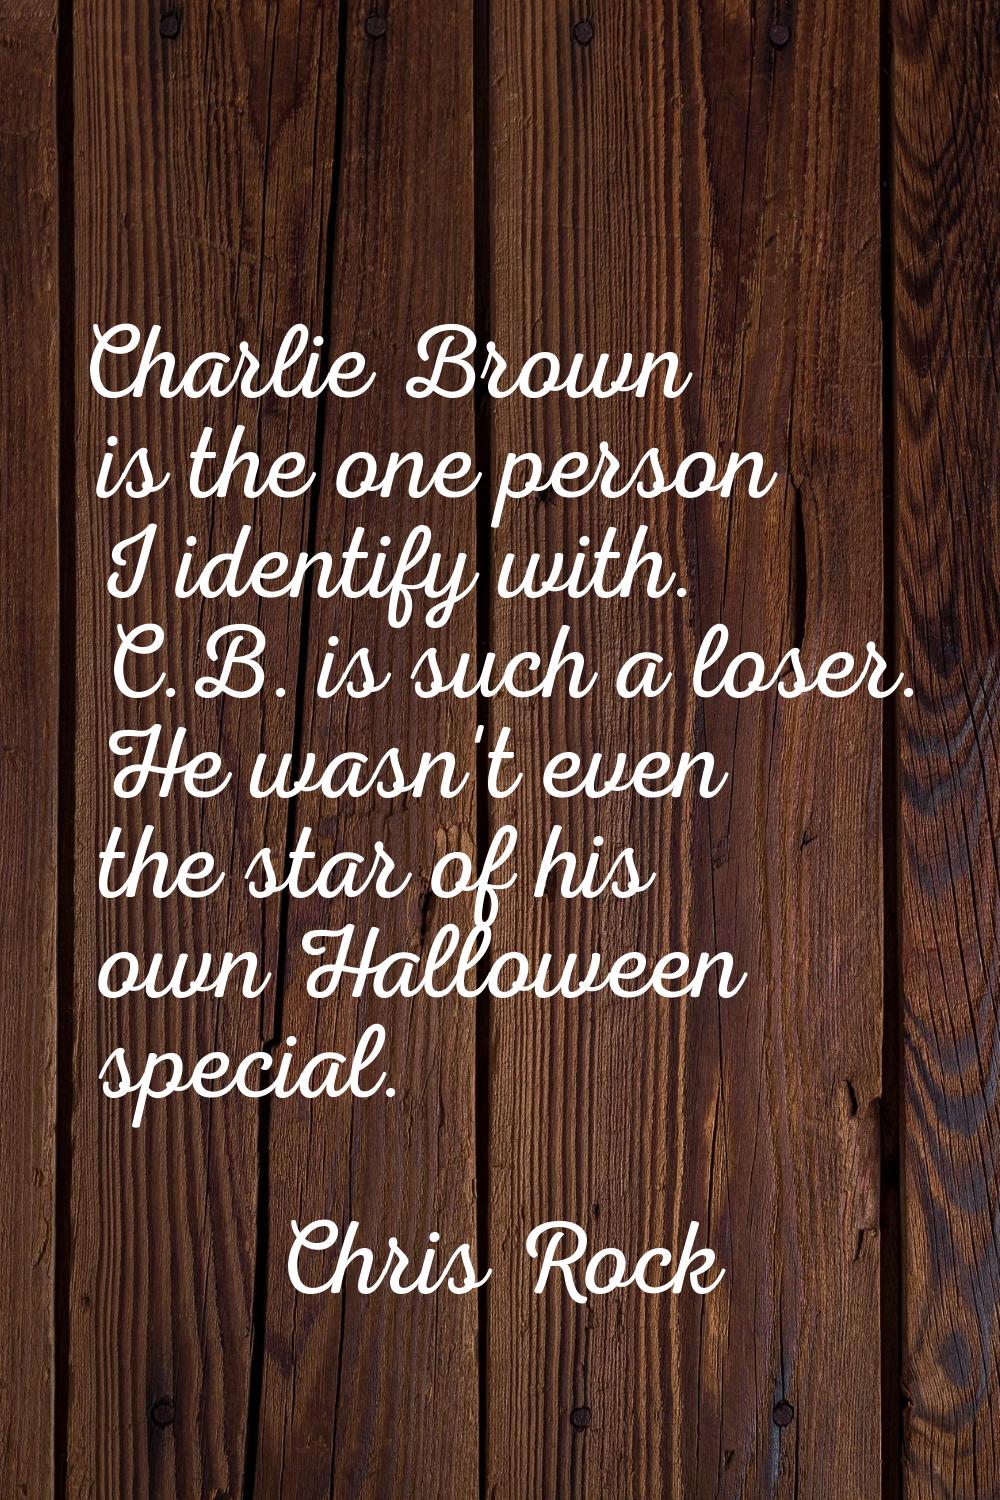 Charlie Brown is the one person I identify with. C.B. is such a loser. He wasn't even the star of h